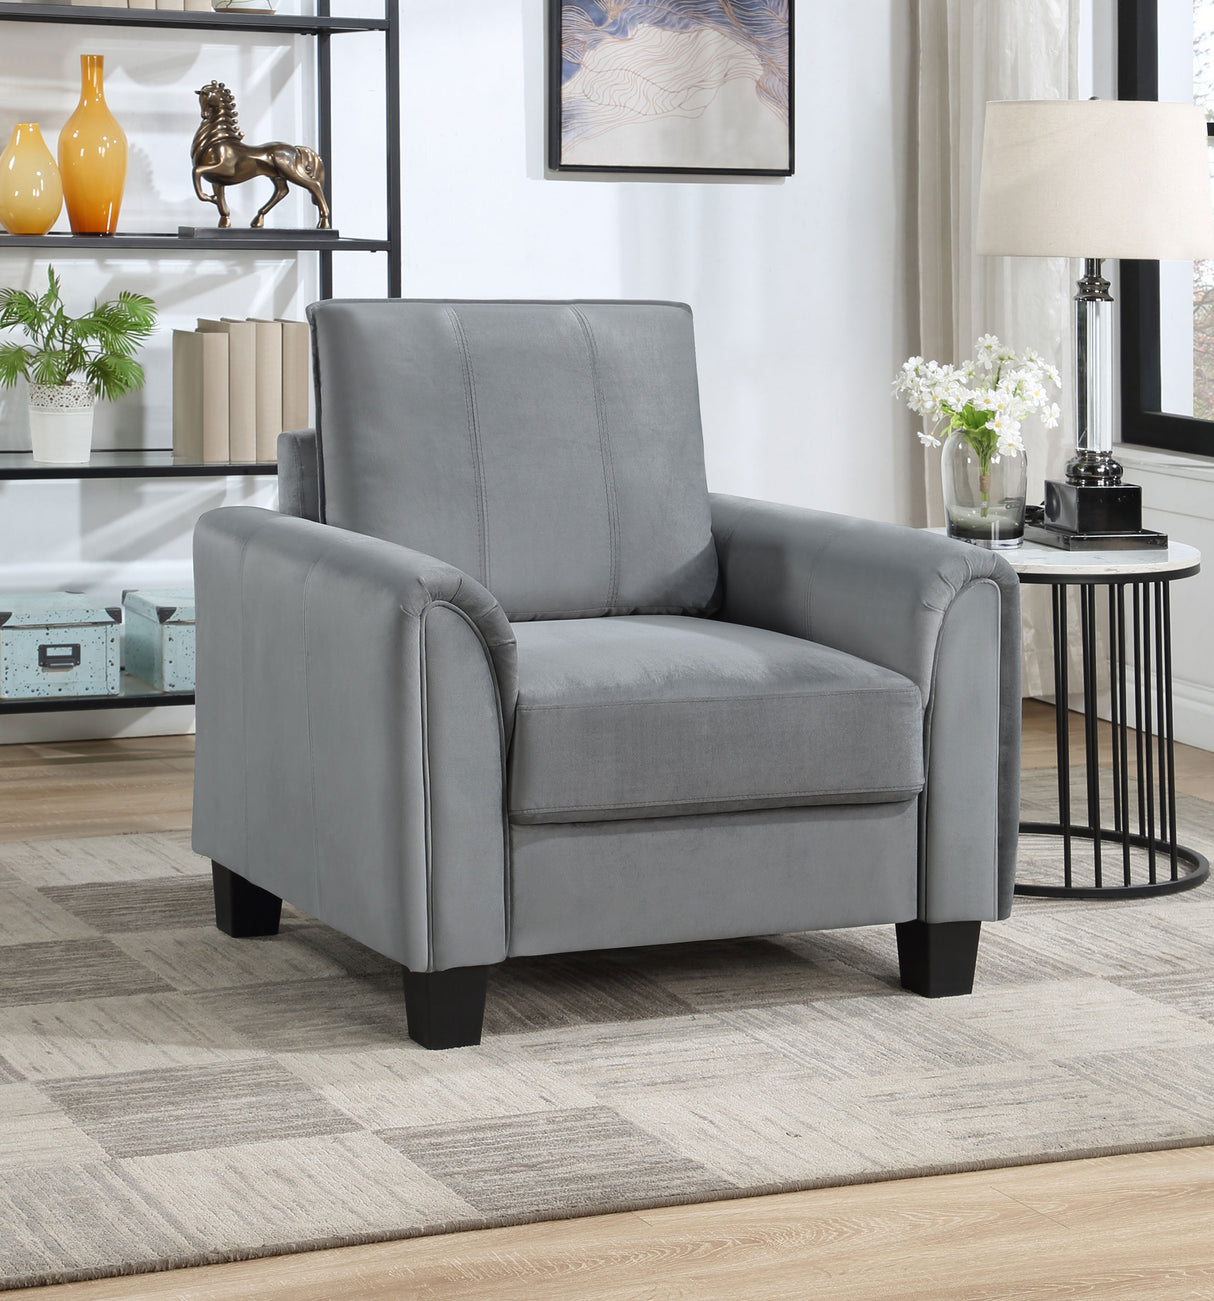 Chair - Davis  Upholstered Rolled Arm Accent Chair Grey